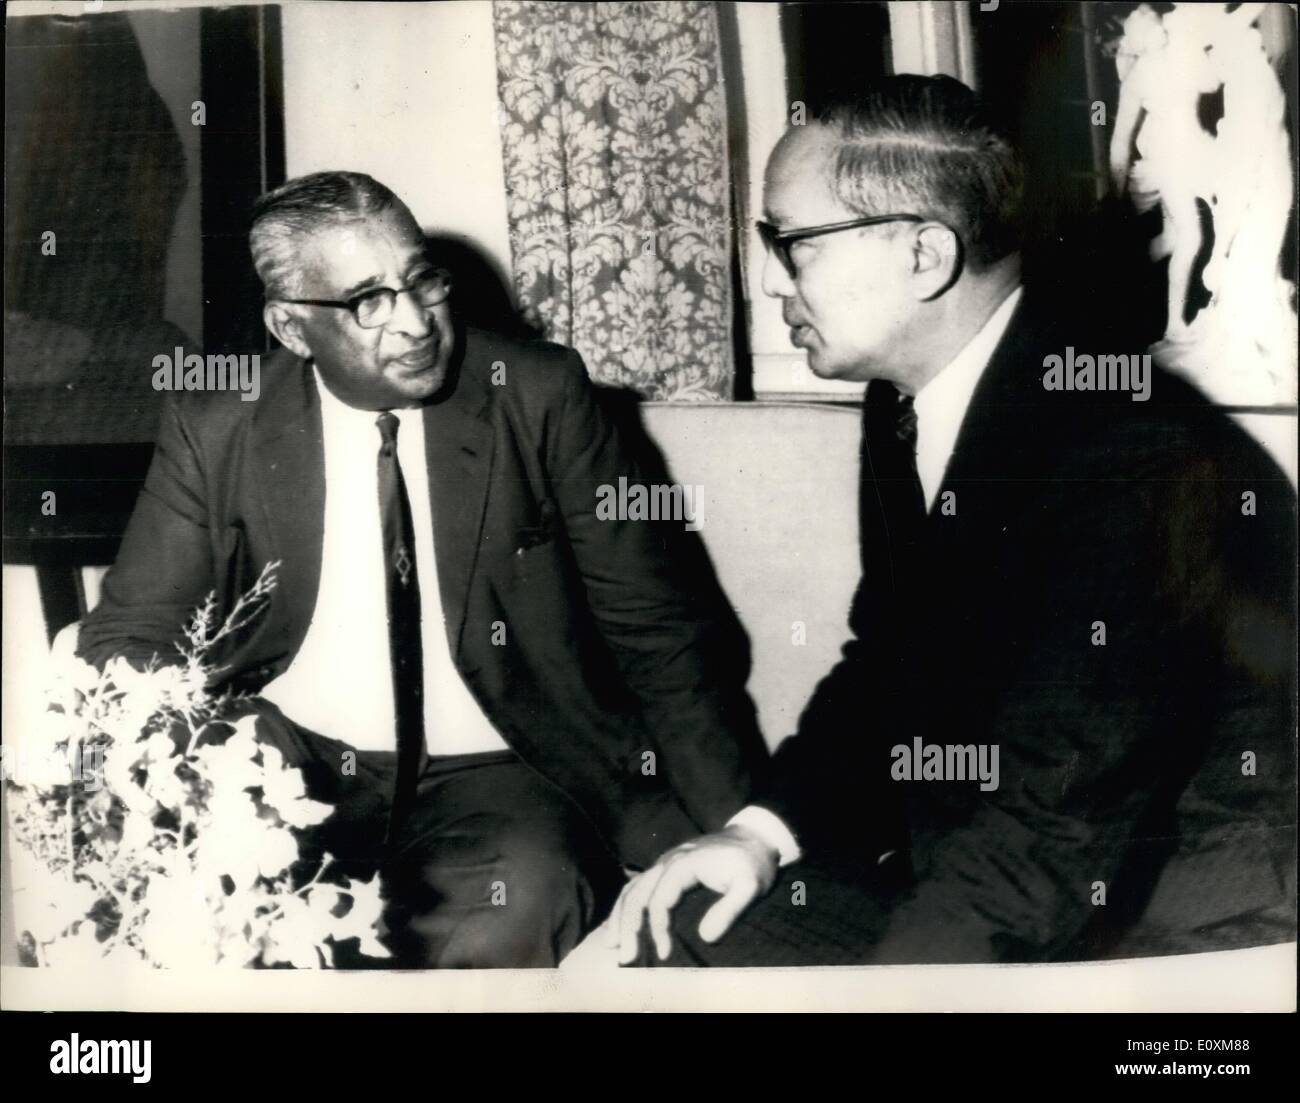 Apr. 04, 1967 - Ceylon Prime Minister Puts Vietnam Peace Plan To U. Thant In Colombo: Mr.Synanayake, Prime Minister of Ceylon has appeared a new peace plan to the North Vietnamese to end the Vietnam war. U Thant, the United-Nations Secretary-General has arrived in Ceylon to discuss Mr. Senanayake's proposal for the new peace plan in Vietnam.Phot Shows Picture received today showing U. Thant discussing the new Vietnam peace plan with Ceylon's Prime Minister, Mr. Sananayake in Colombo. Stock Photo